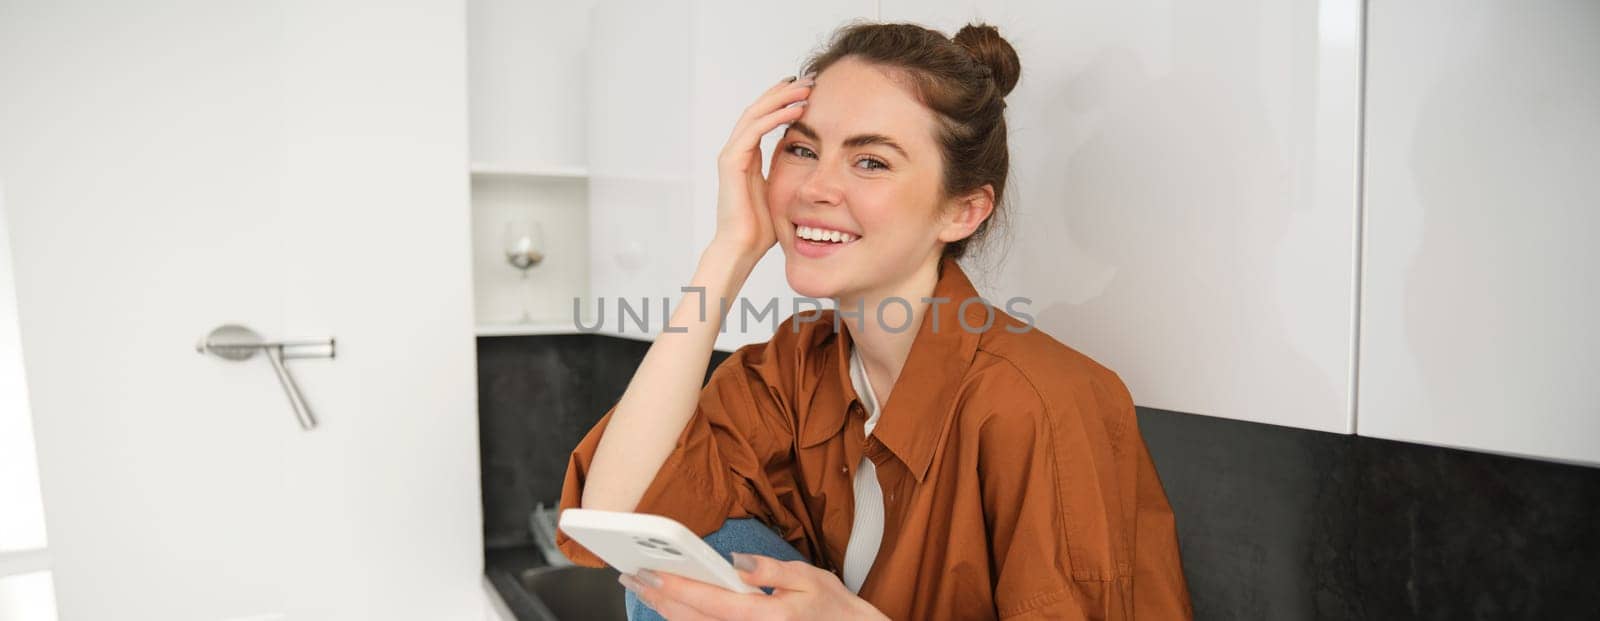 Portrait of young woman with mobile phone, browsing social media, online shopping, sitting on kitchen counter, smiling and looking happy.